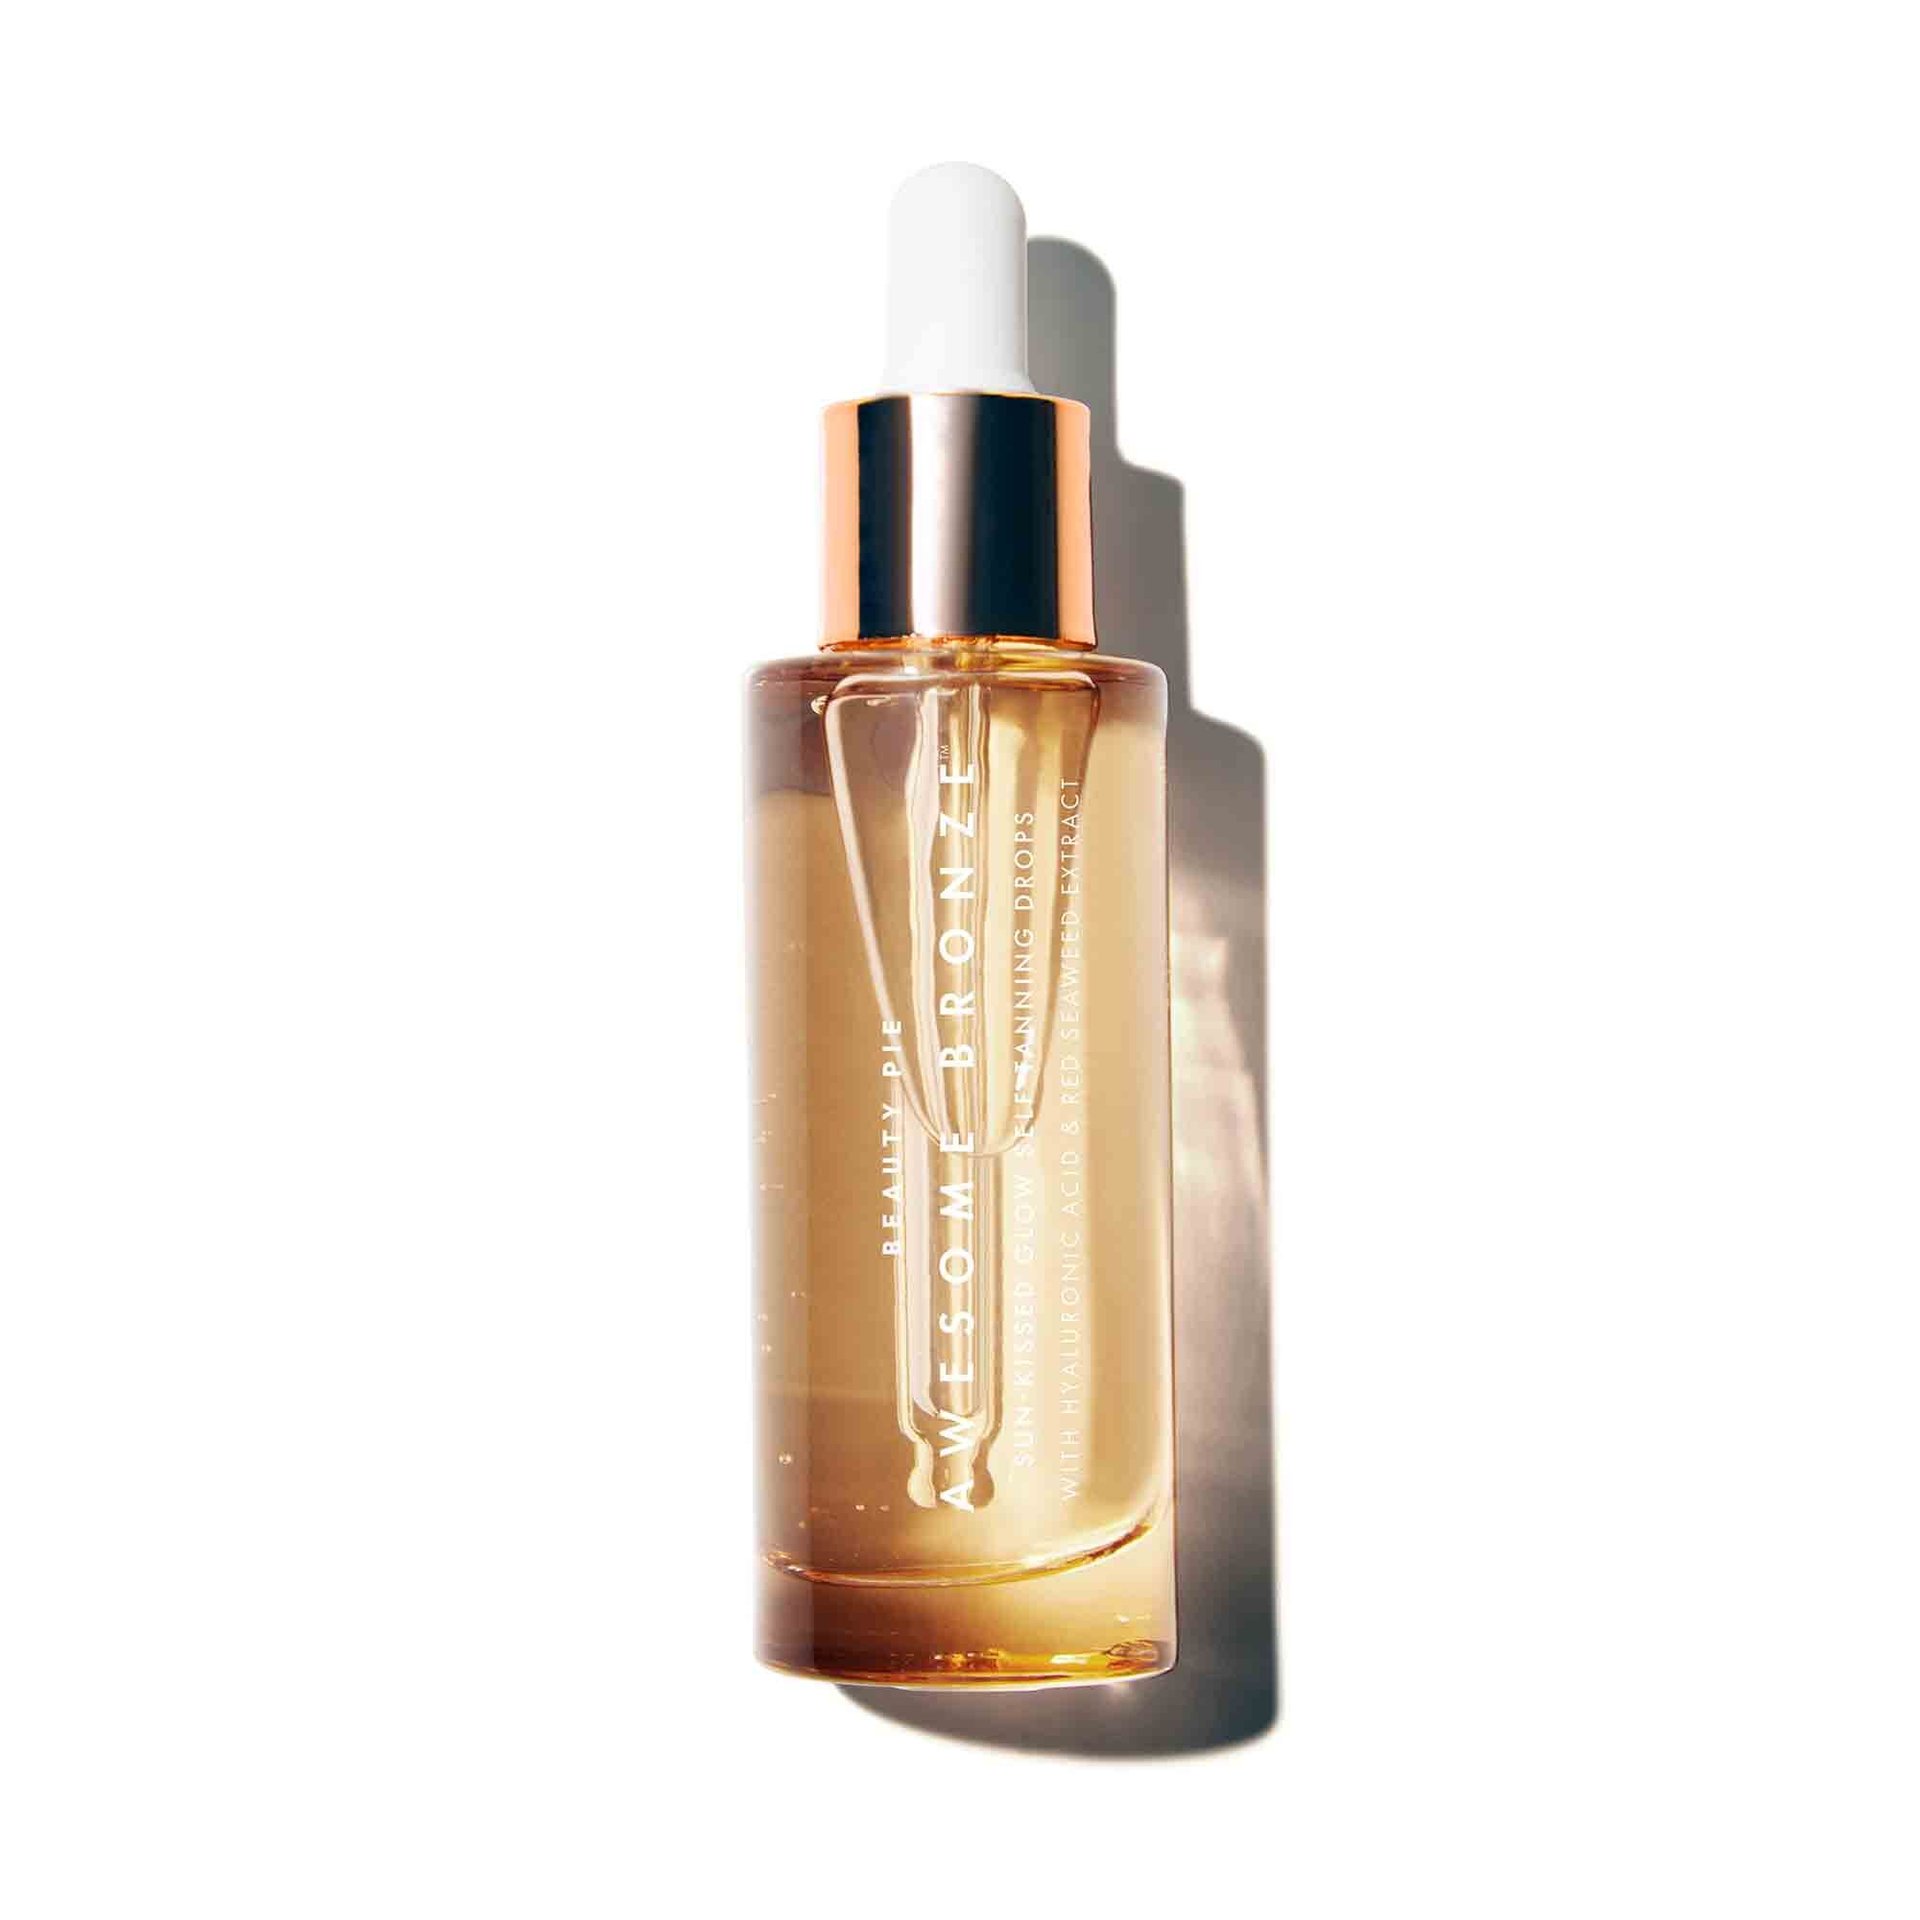 Awesome Bronze™ Sun-kissed Glow Self-Tanning Drops